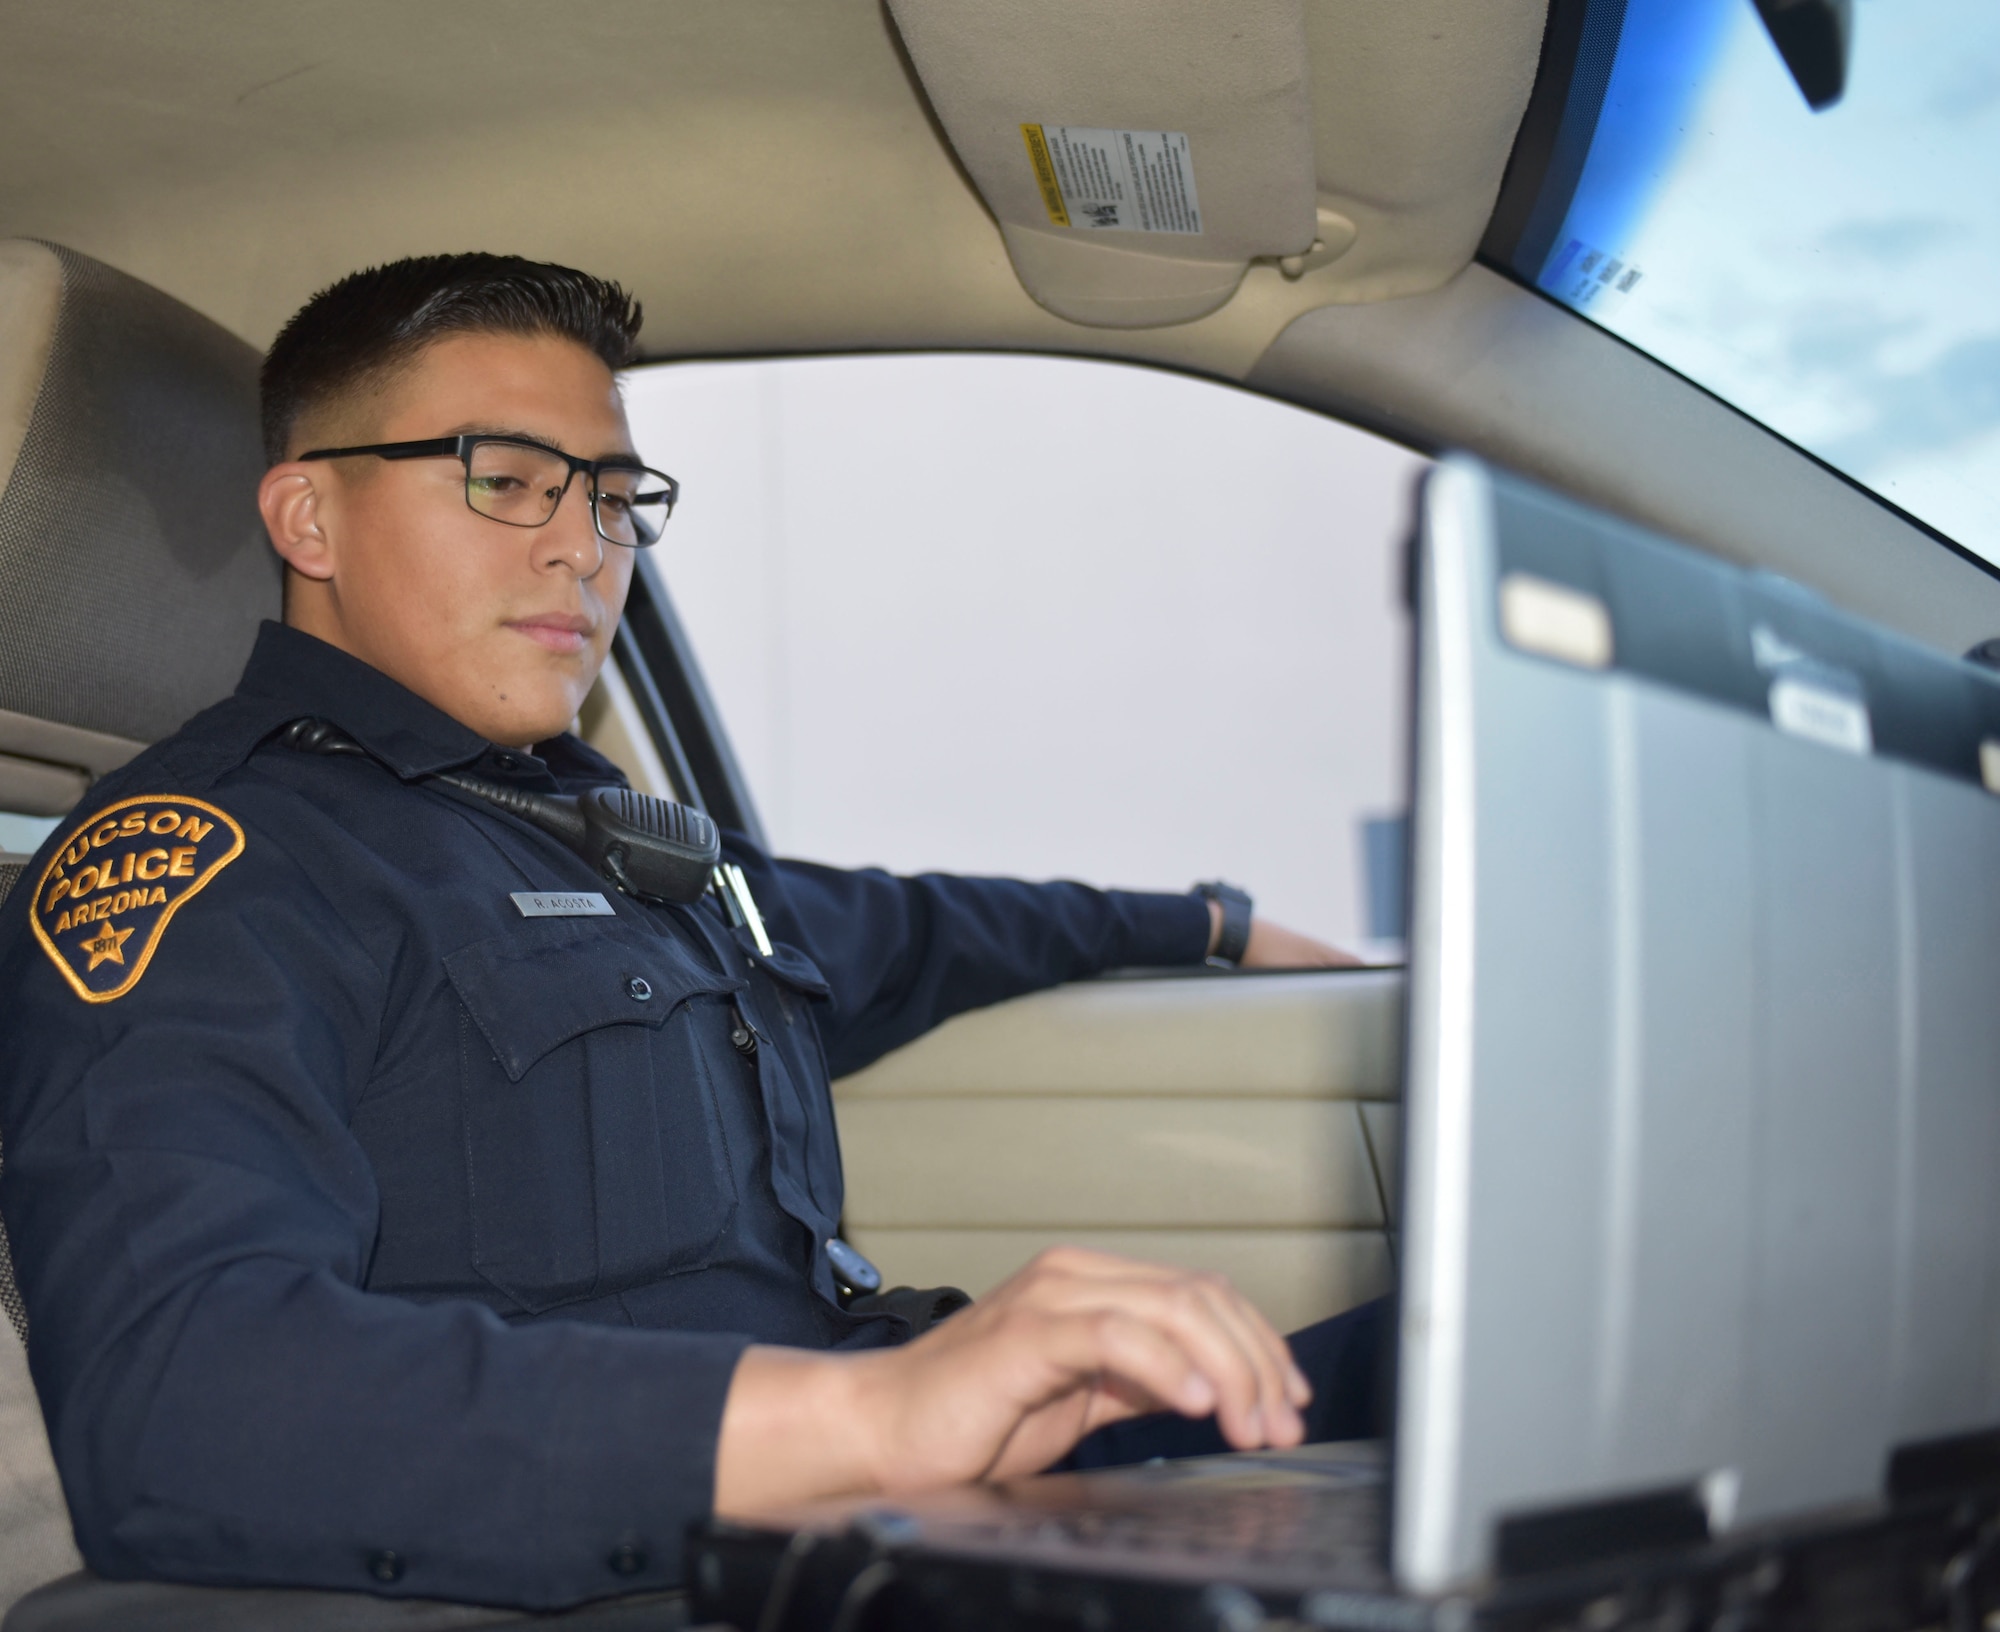 Air Force Staff Sgt. Rodrigo Acosta, a security forces specialist with the Arizona Air National Guard's 162nd Wing and a Tucson Police Department police officer, reviews data on his patrol car laptop in Tucson, Arizona, Aug. 28, 2018. Acosta said he thrives in settings outside of the office environment. "I can't see myself sitting behind a desk at all. I think I would fall asleep," he said. "Law enforcement and security forces always keeps me on my toes."